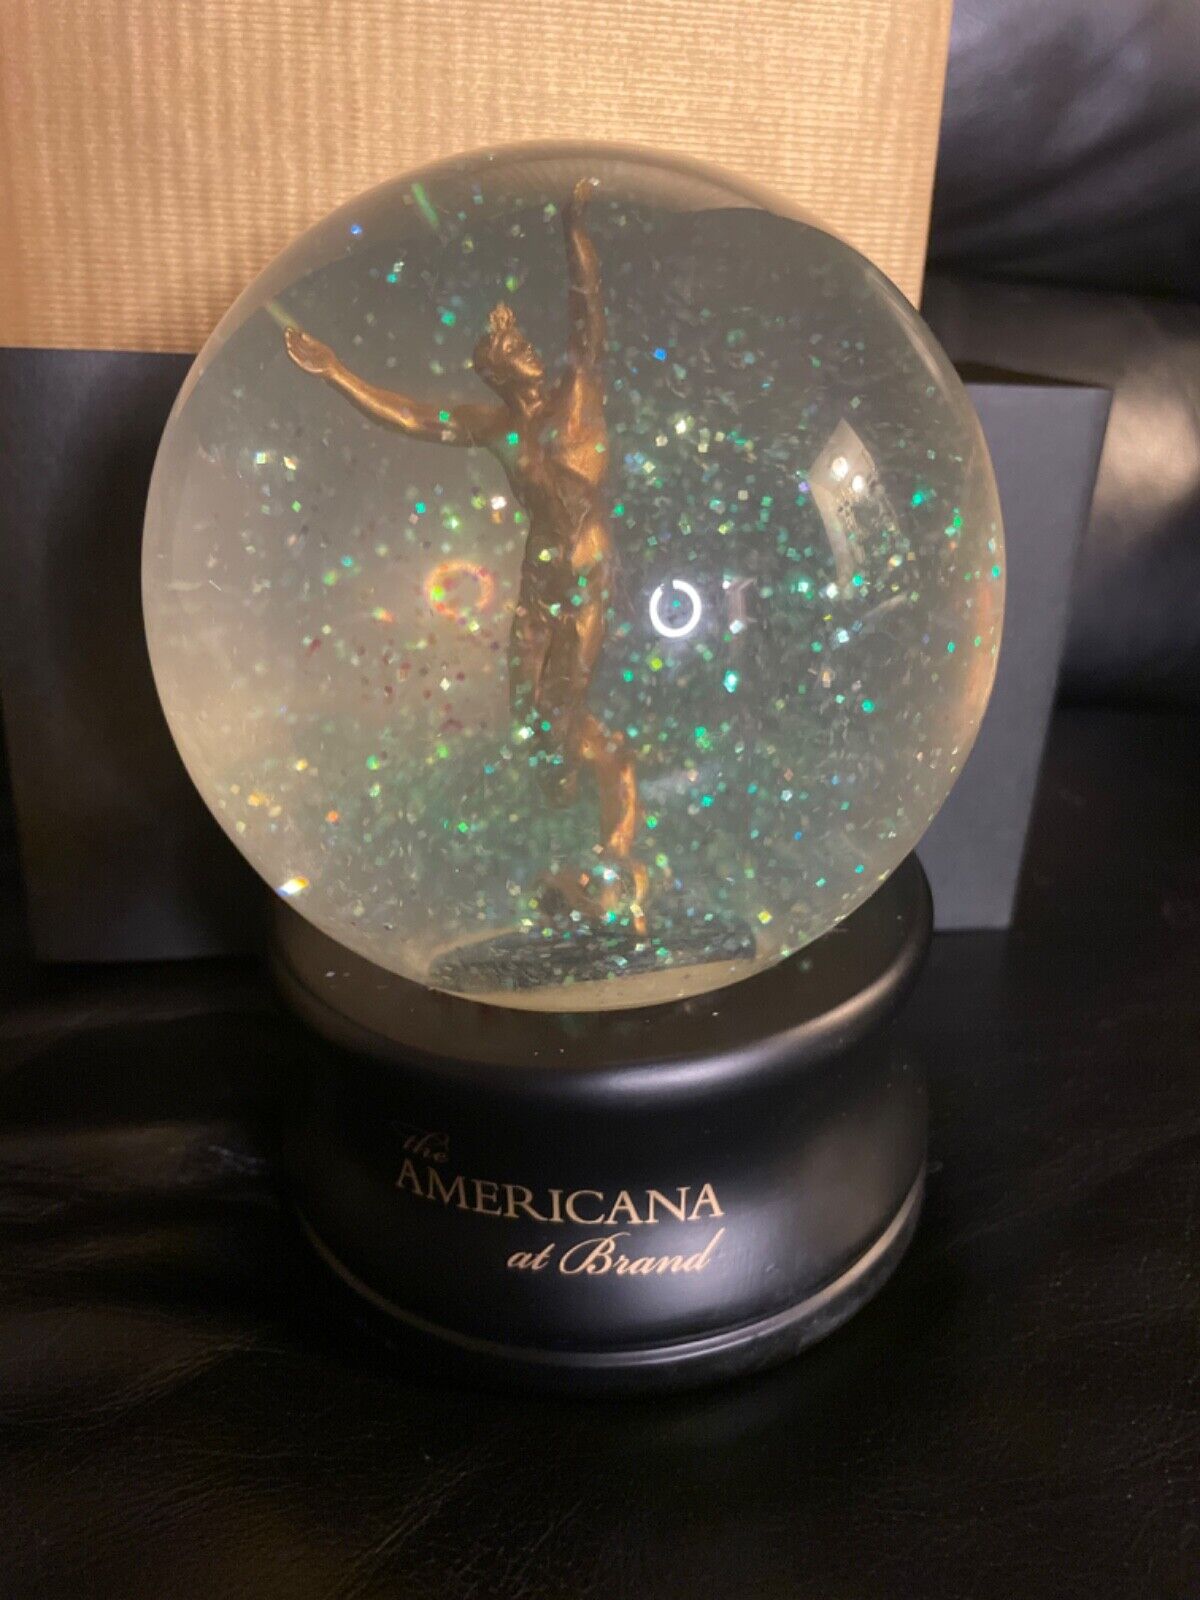 New in Box The Americana at Brand Snow Globe- gilded man spirit of American yout